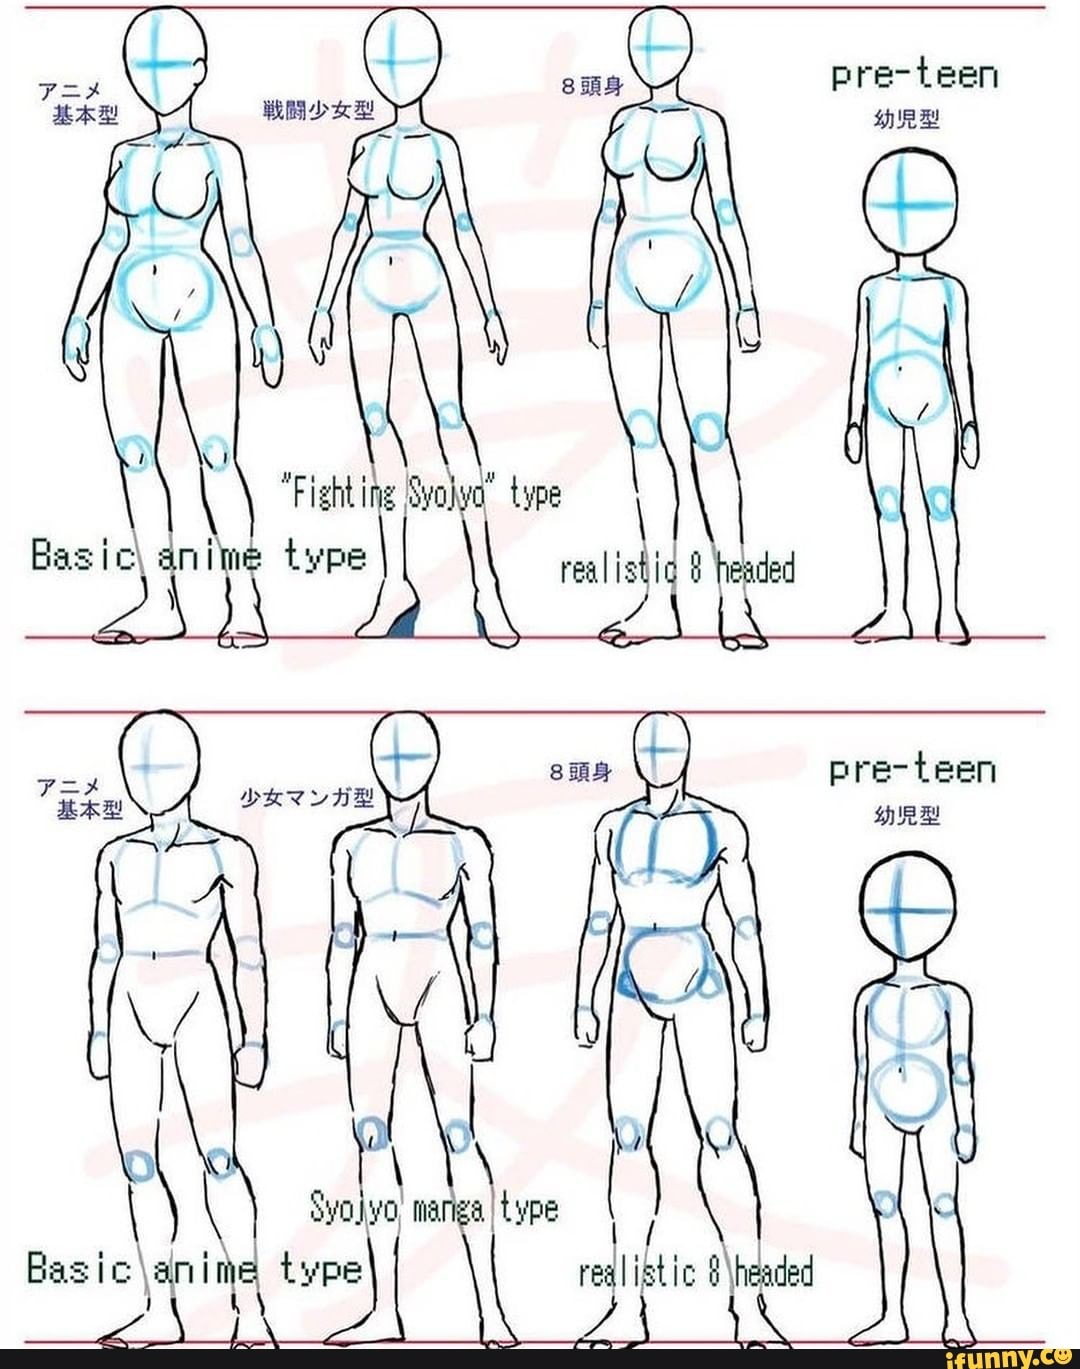 Differences between men and women's bodies in anime - Anime Art Magazine